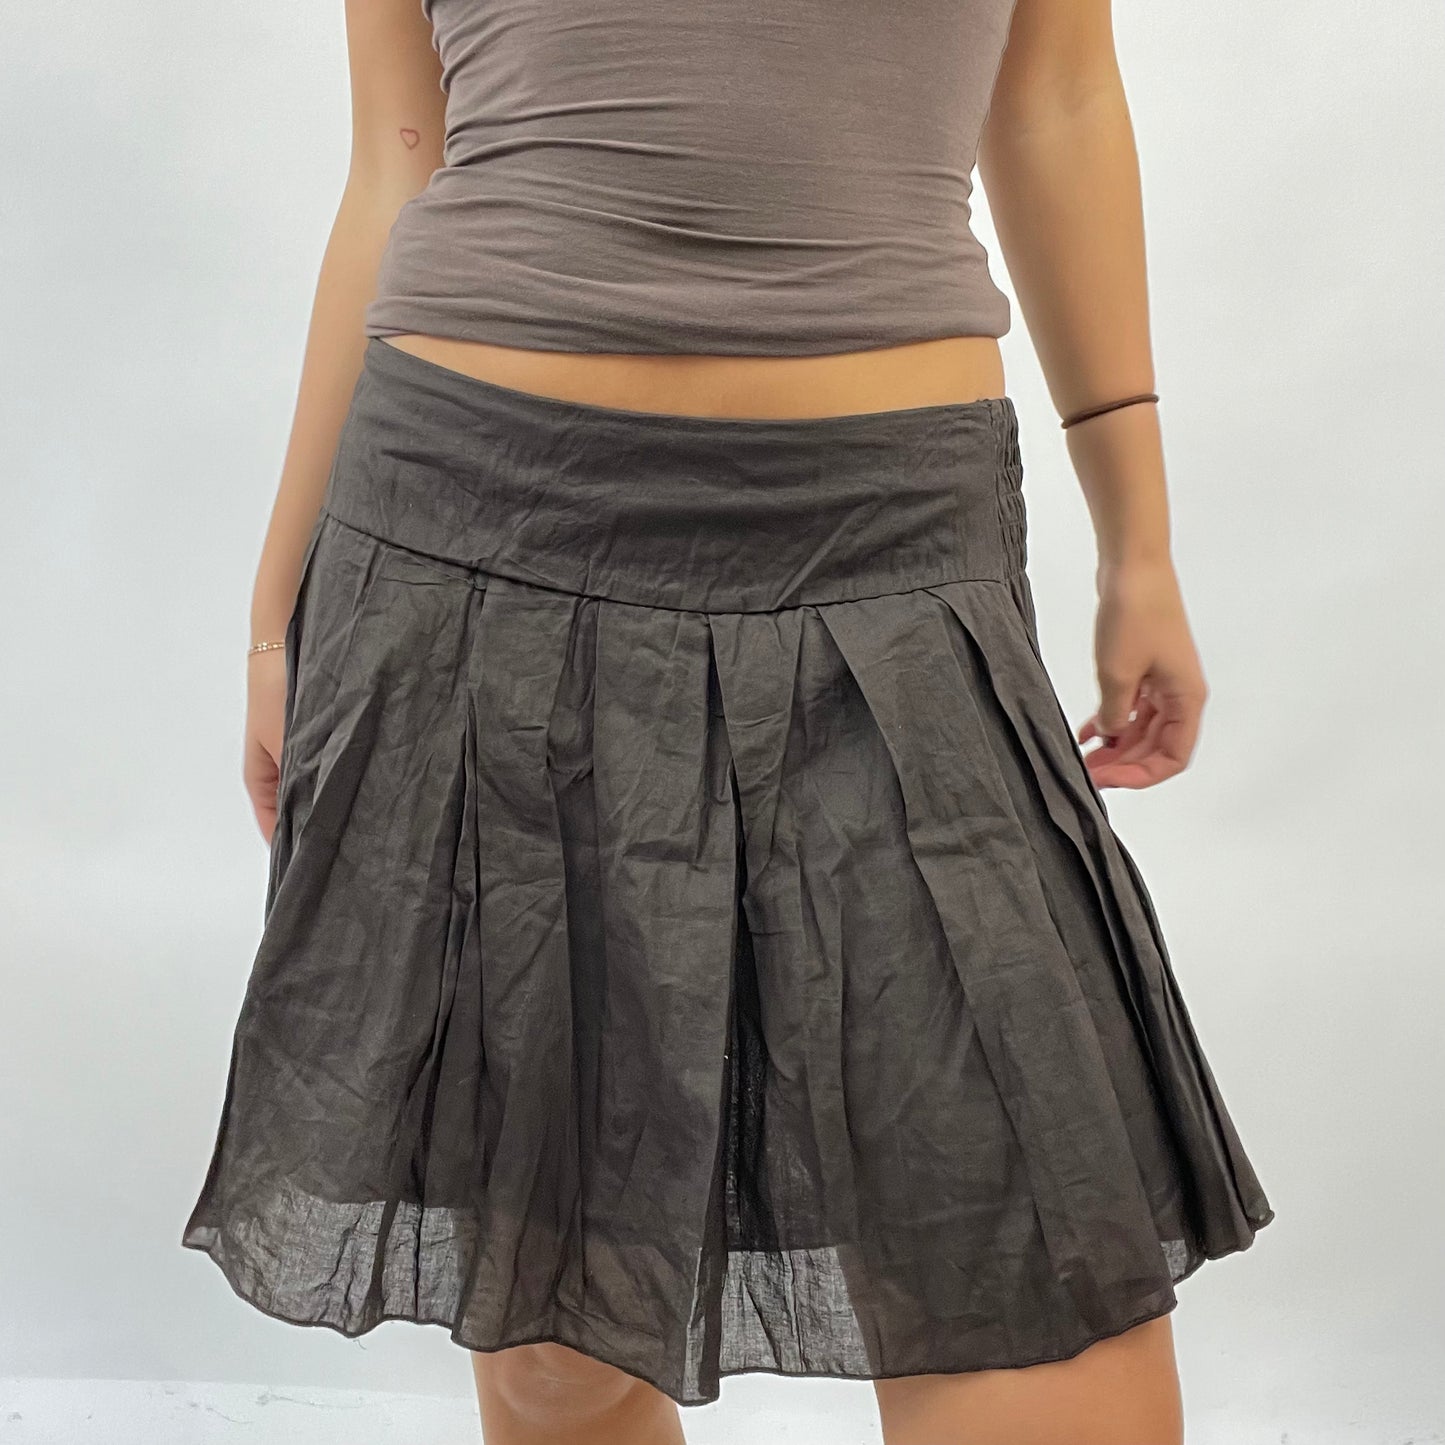 CORPCORE DROP | small chocolate brown a-line skirt with stretchy back